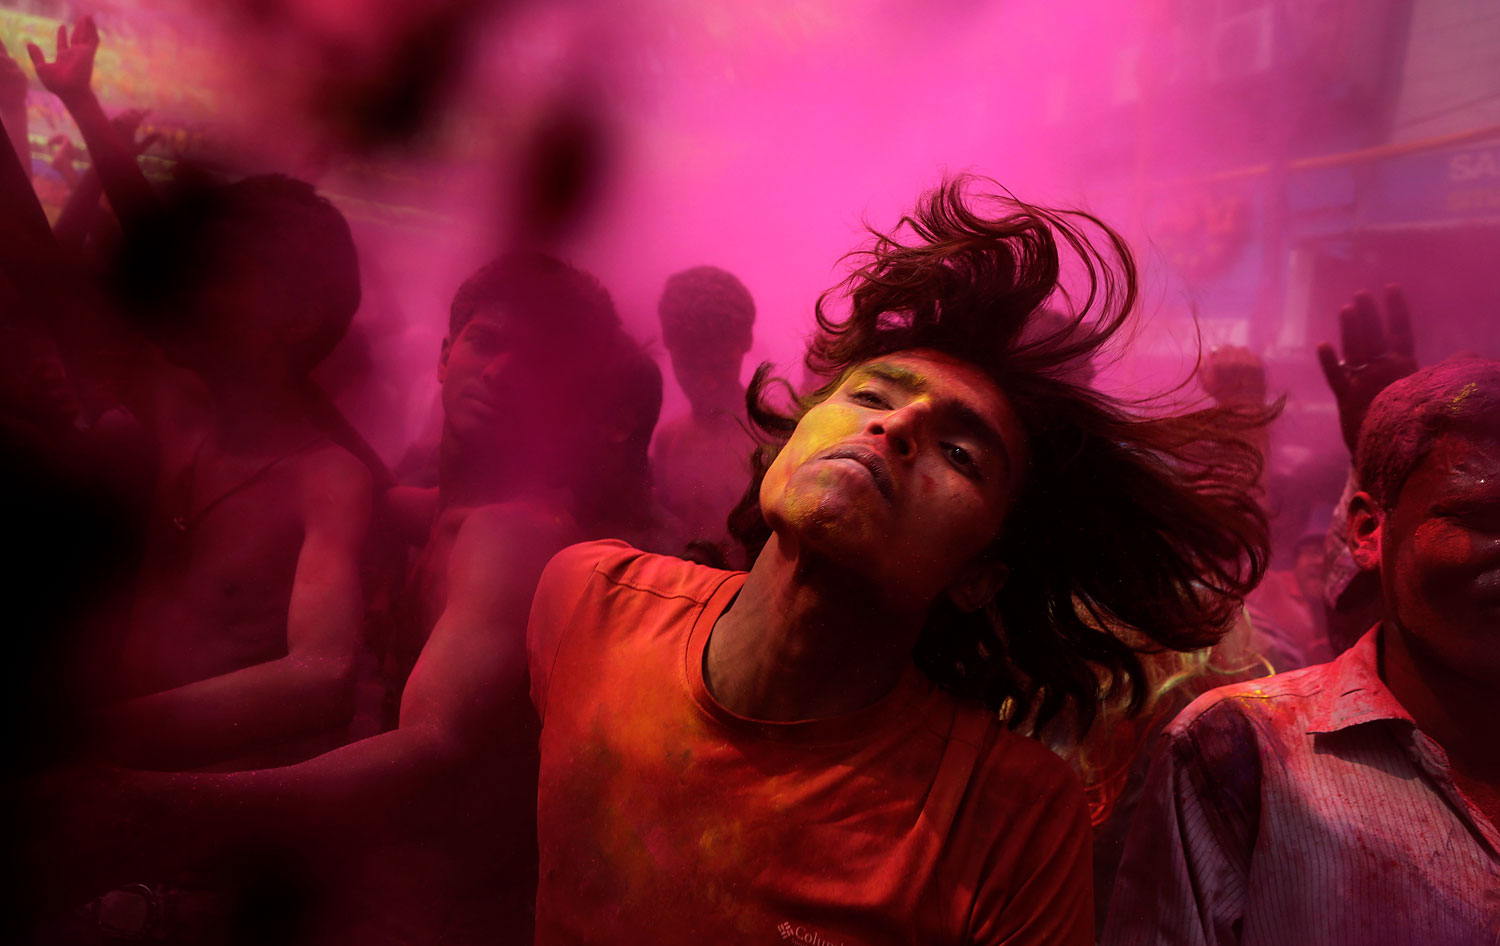 Indians, faces smeared with colored powder, dance during celebrations marking Holi, the Hindu festival of colors, in Gauhati, India, March 17, 2014.